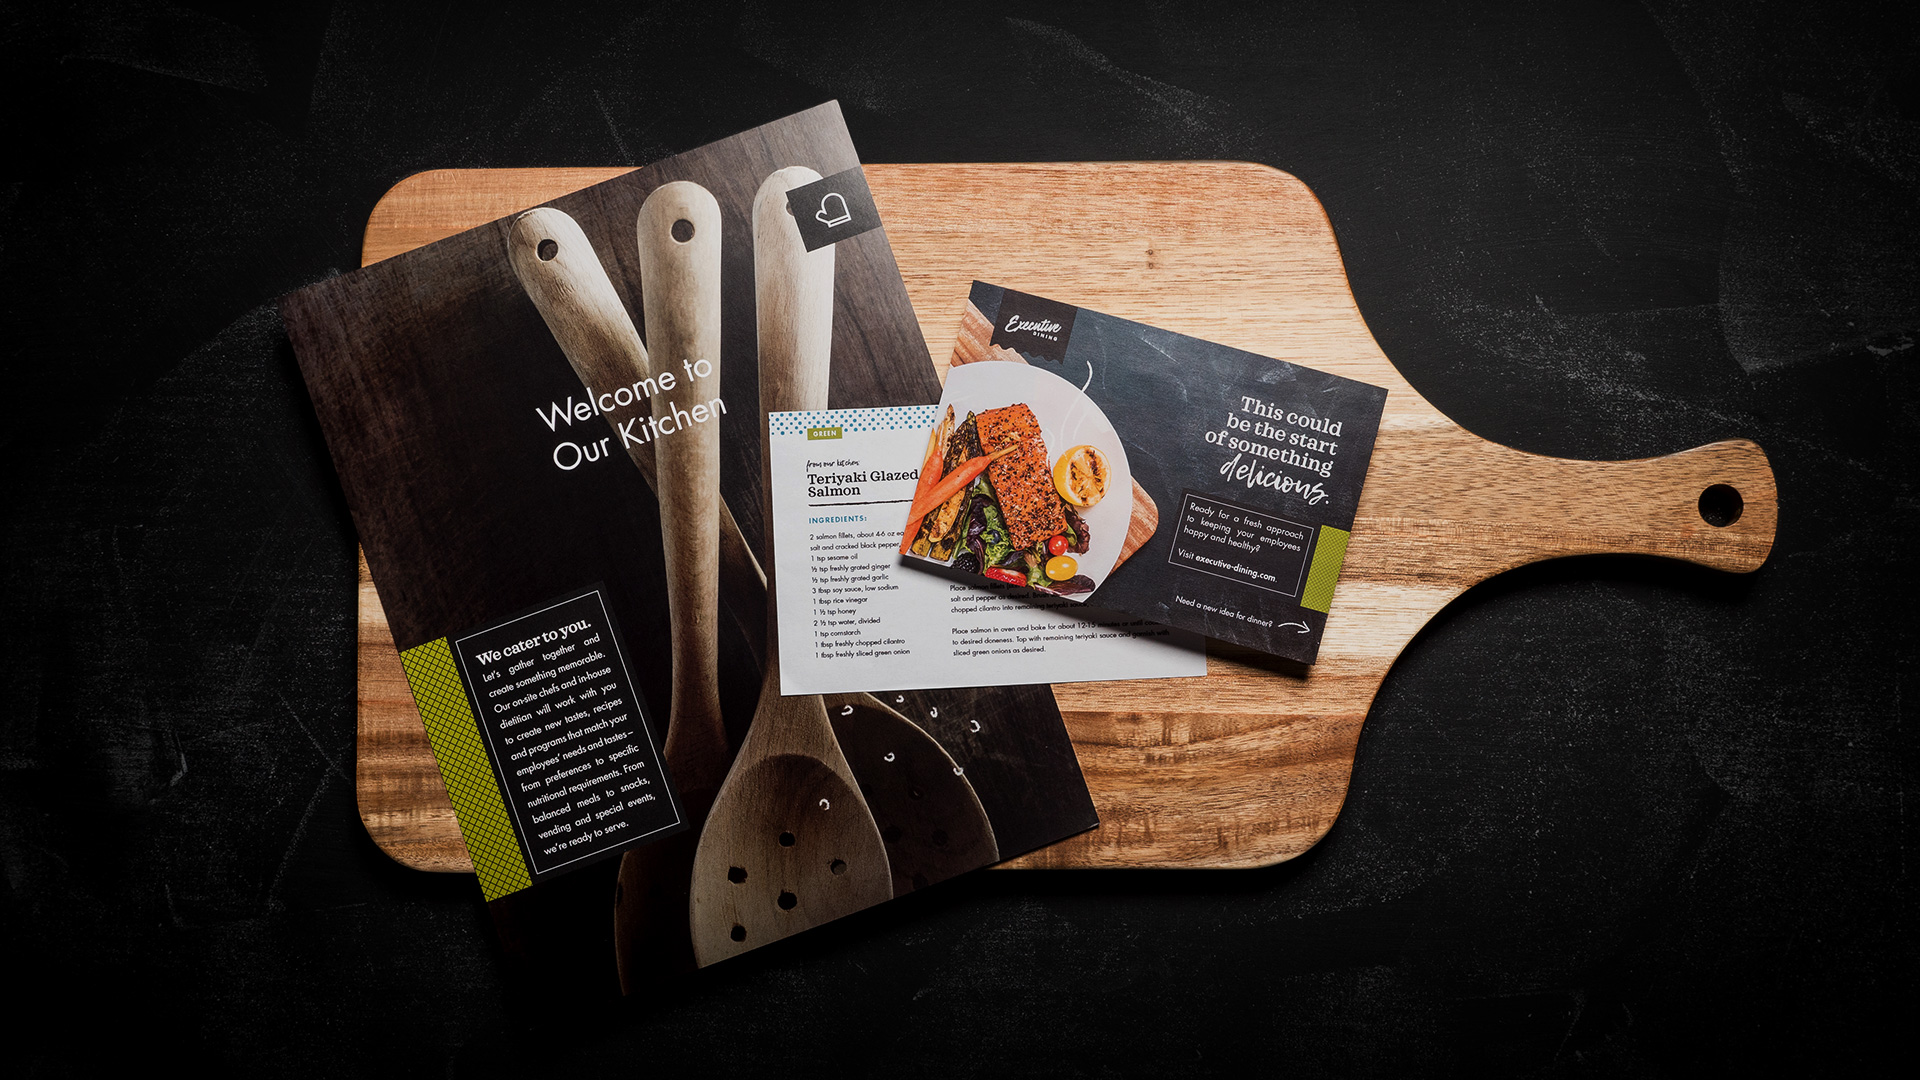 Branded marketing collateral for Executive Dining